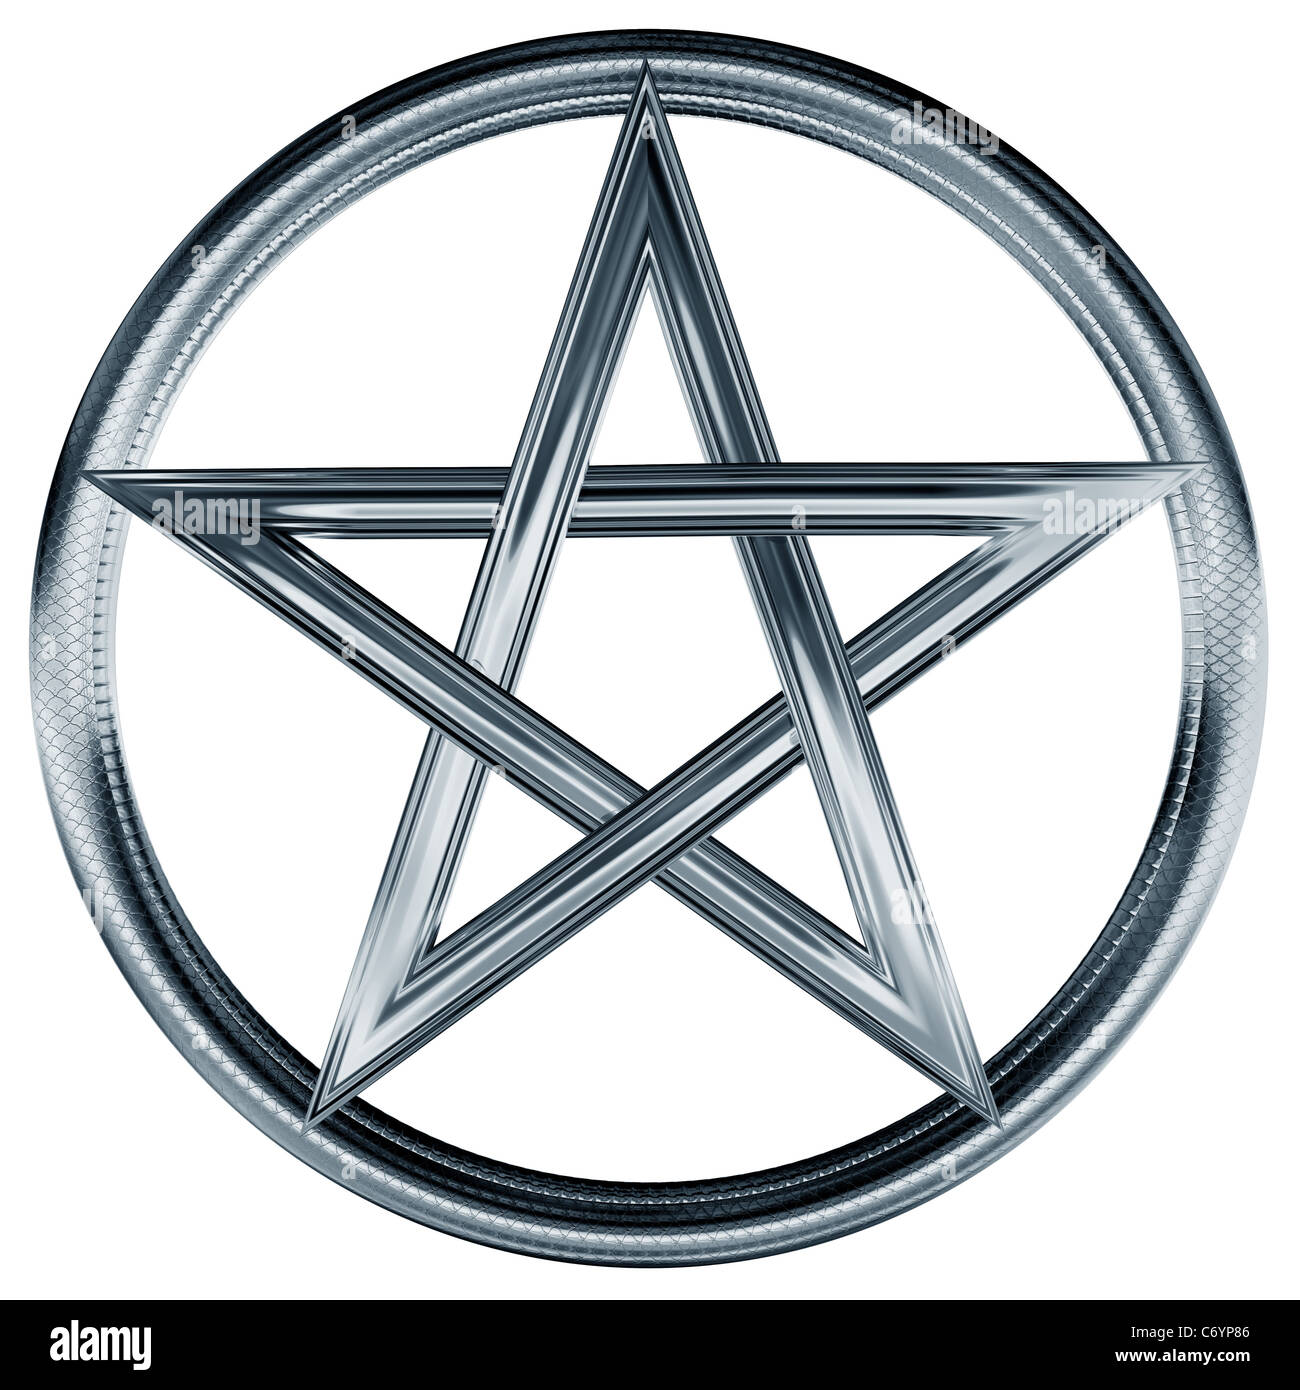 Isolated illustration of an ornate silver pentagram Stock Photo